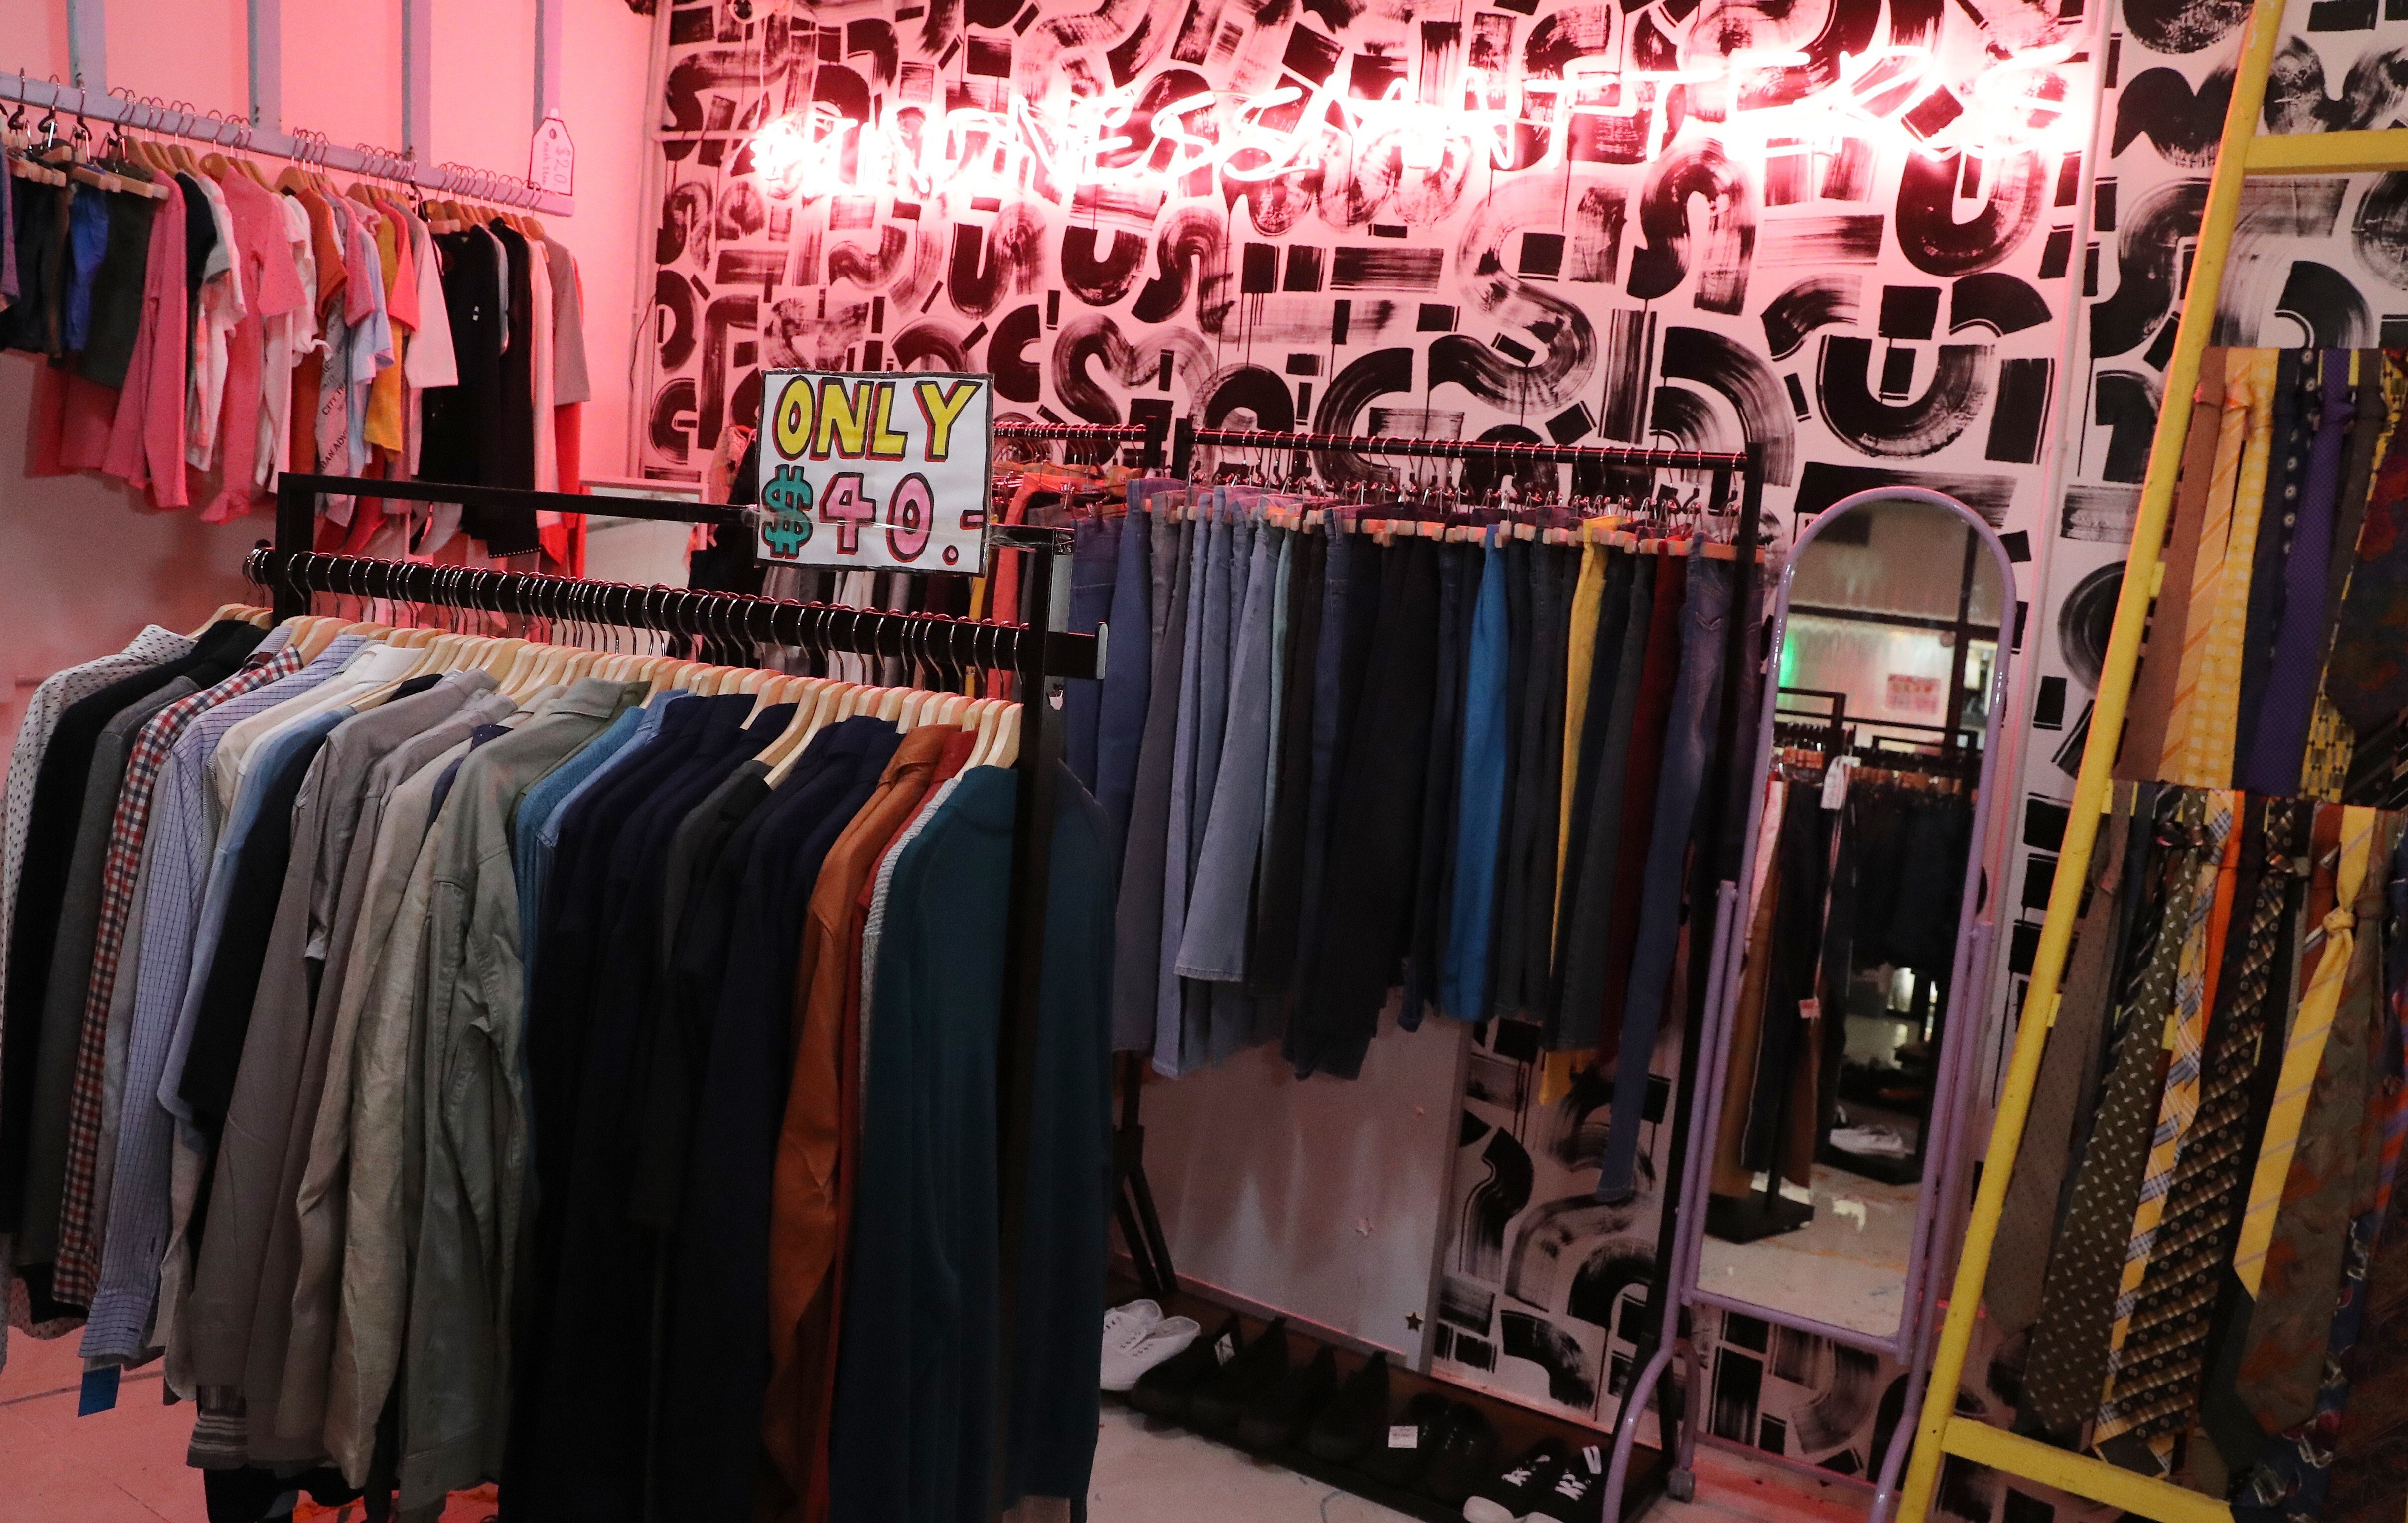 Second-hand clothing on sale at 1ofakind, ImpactHK's new store in Jordan. Photo: SCMP / Edmond So